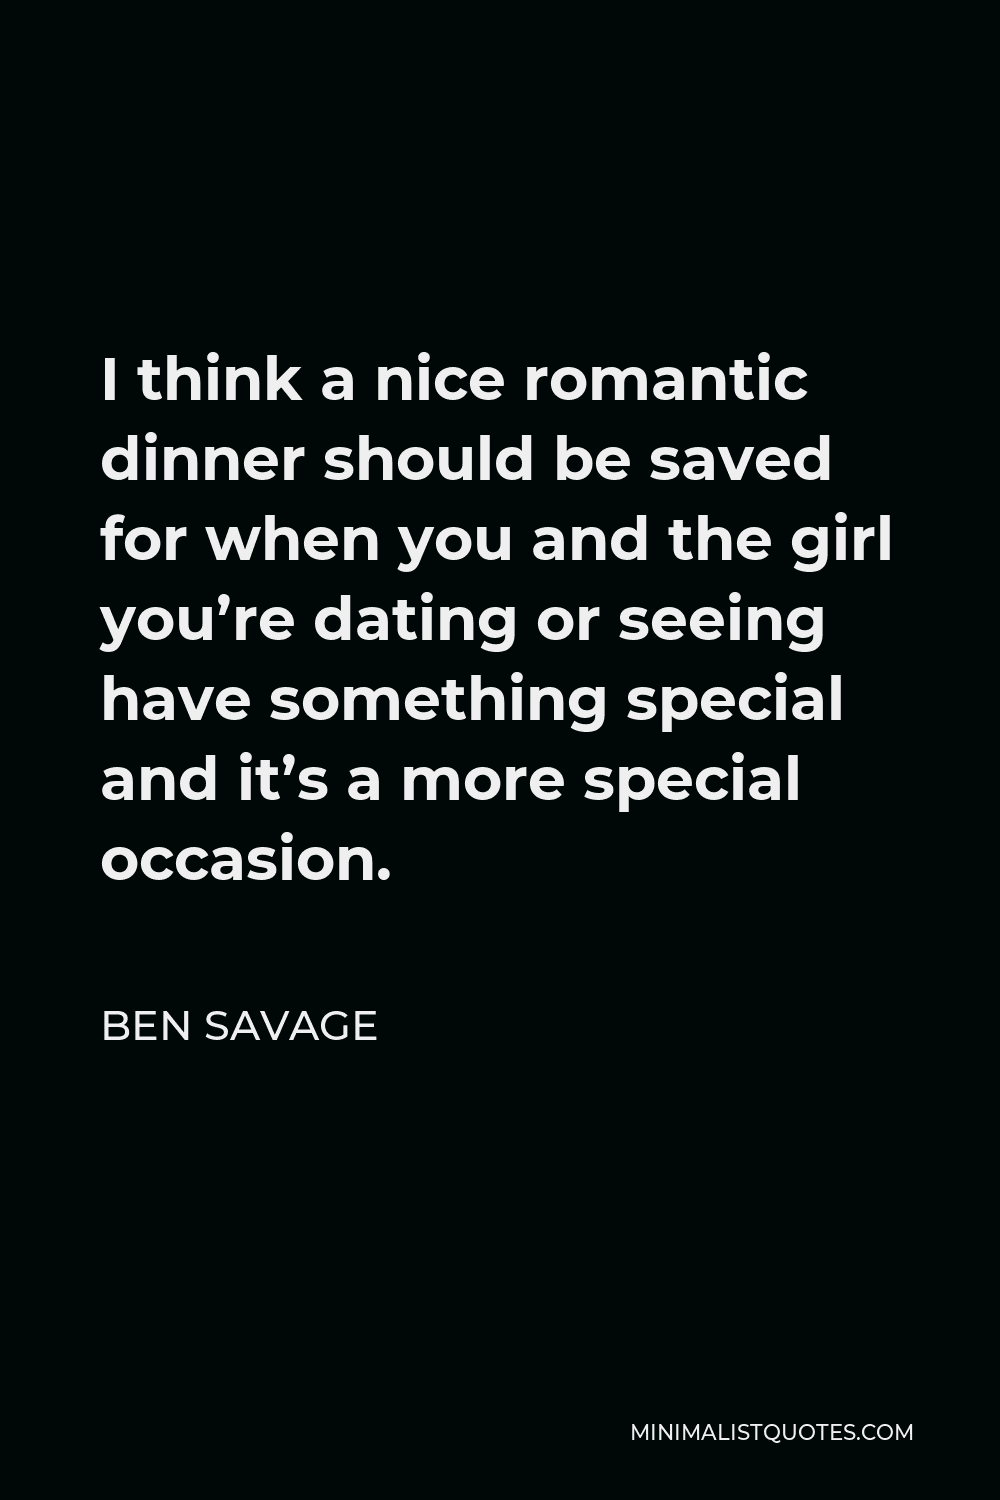 Ben Savage Quote - I think a nice romantic dinner should be saved for when you and the girl you’re dating or seeing have something special and it’s a more special occasion.